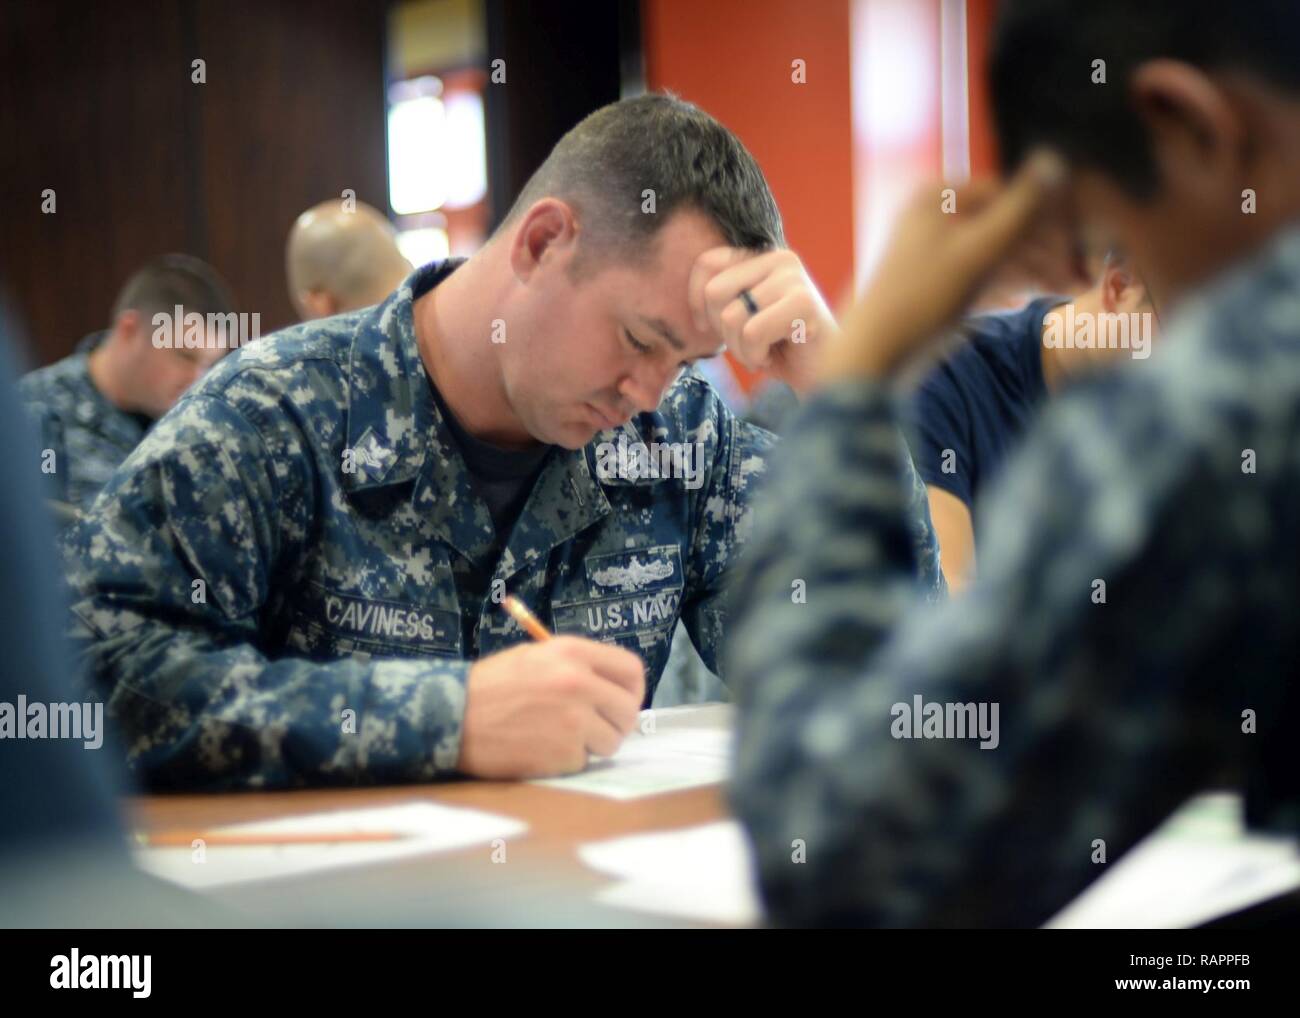 ANTA RITA, Guam (March 2, 2017) – Electronics Technician 2nd Class Christopher Caviness, assigned to the submarine tender USS Frank Cable (AS 40) and native of Climax, N.C., takes the Navy-wide E-6 advancement exam at Naval Base Guam, March 2.  Frank Cable is forward-deployed to the island of Guam and conducts maintenance and support of submarines and surface vessels deployed to the U.S. 5th and 7th Fleet area of operations. Stock Photo